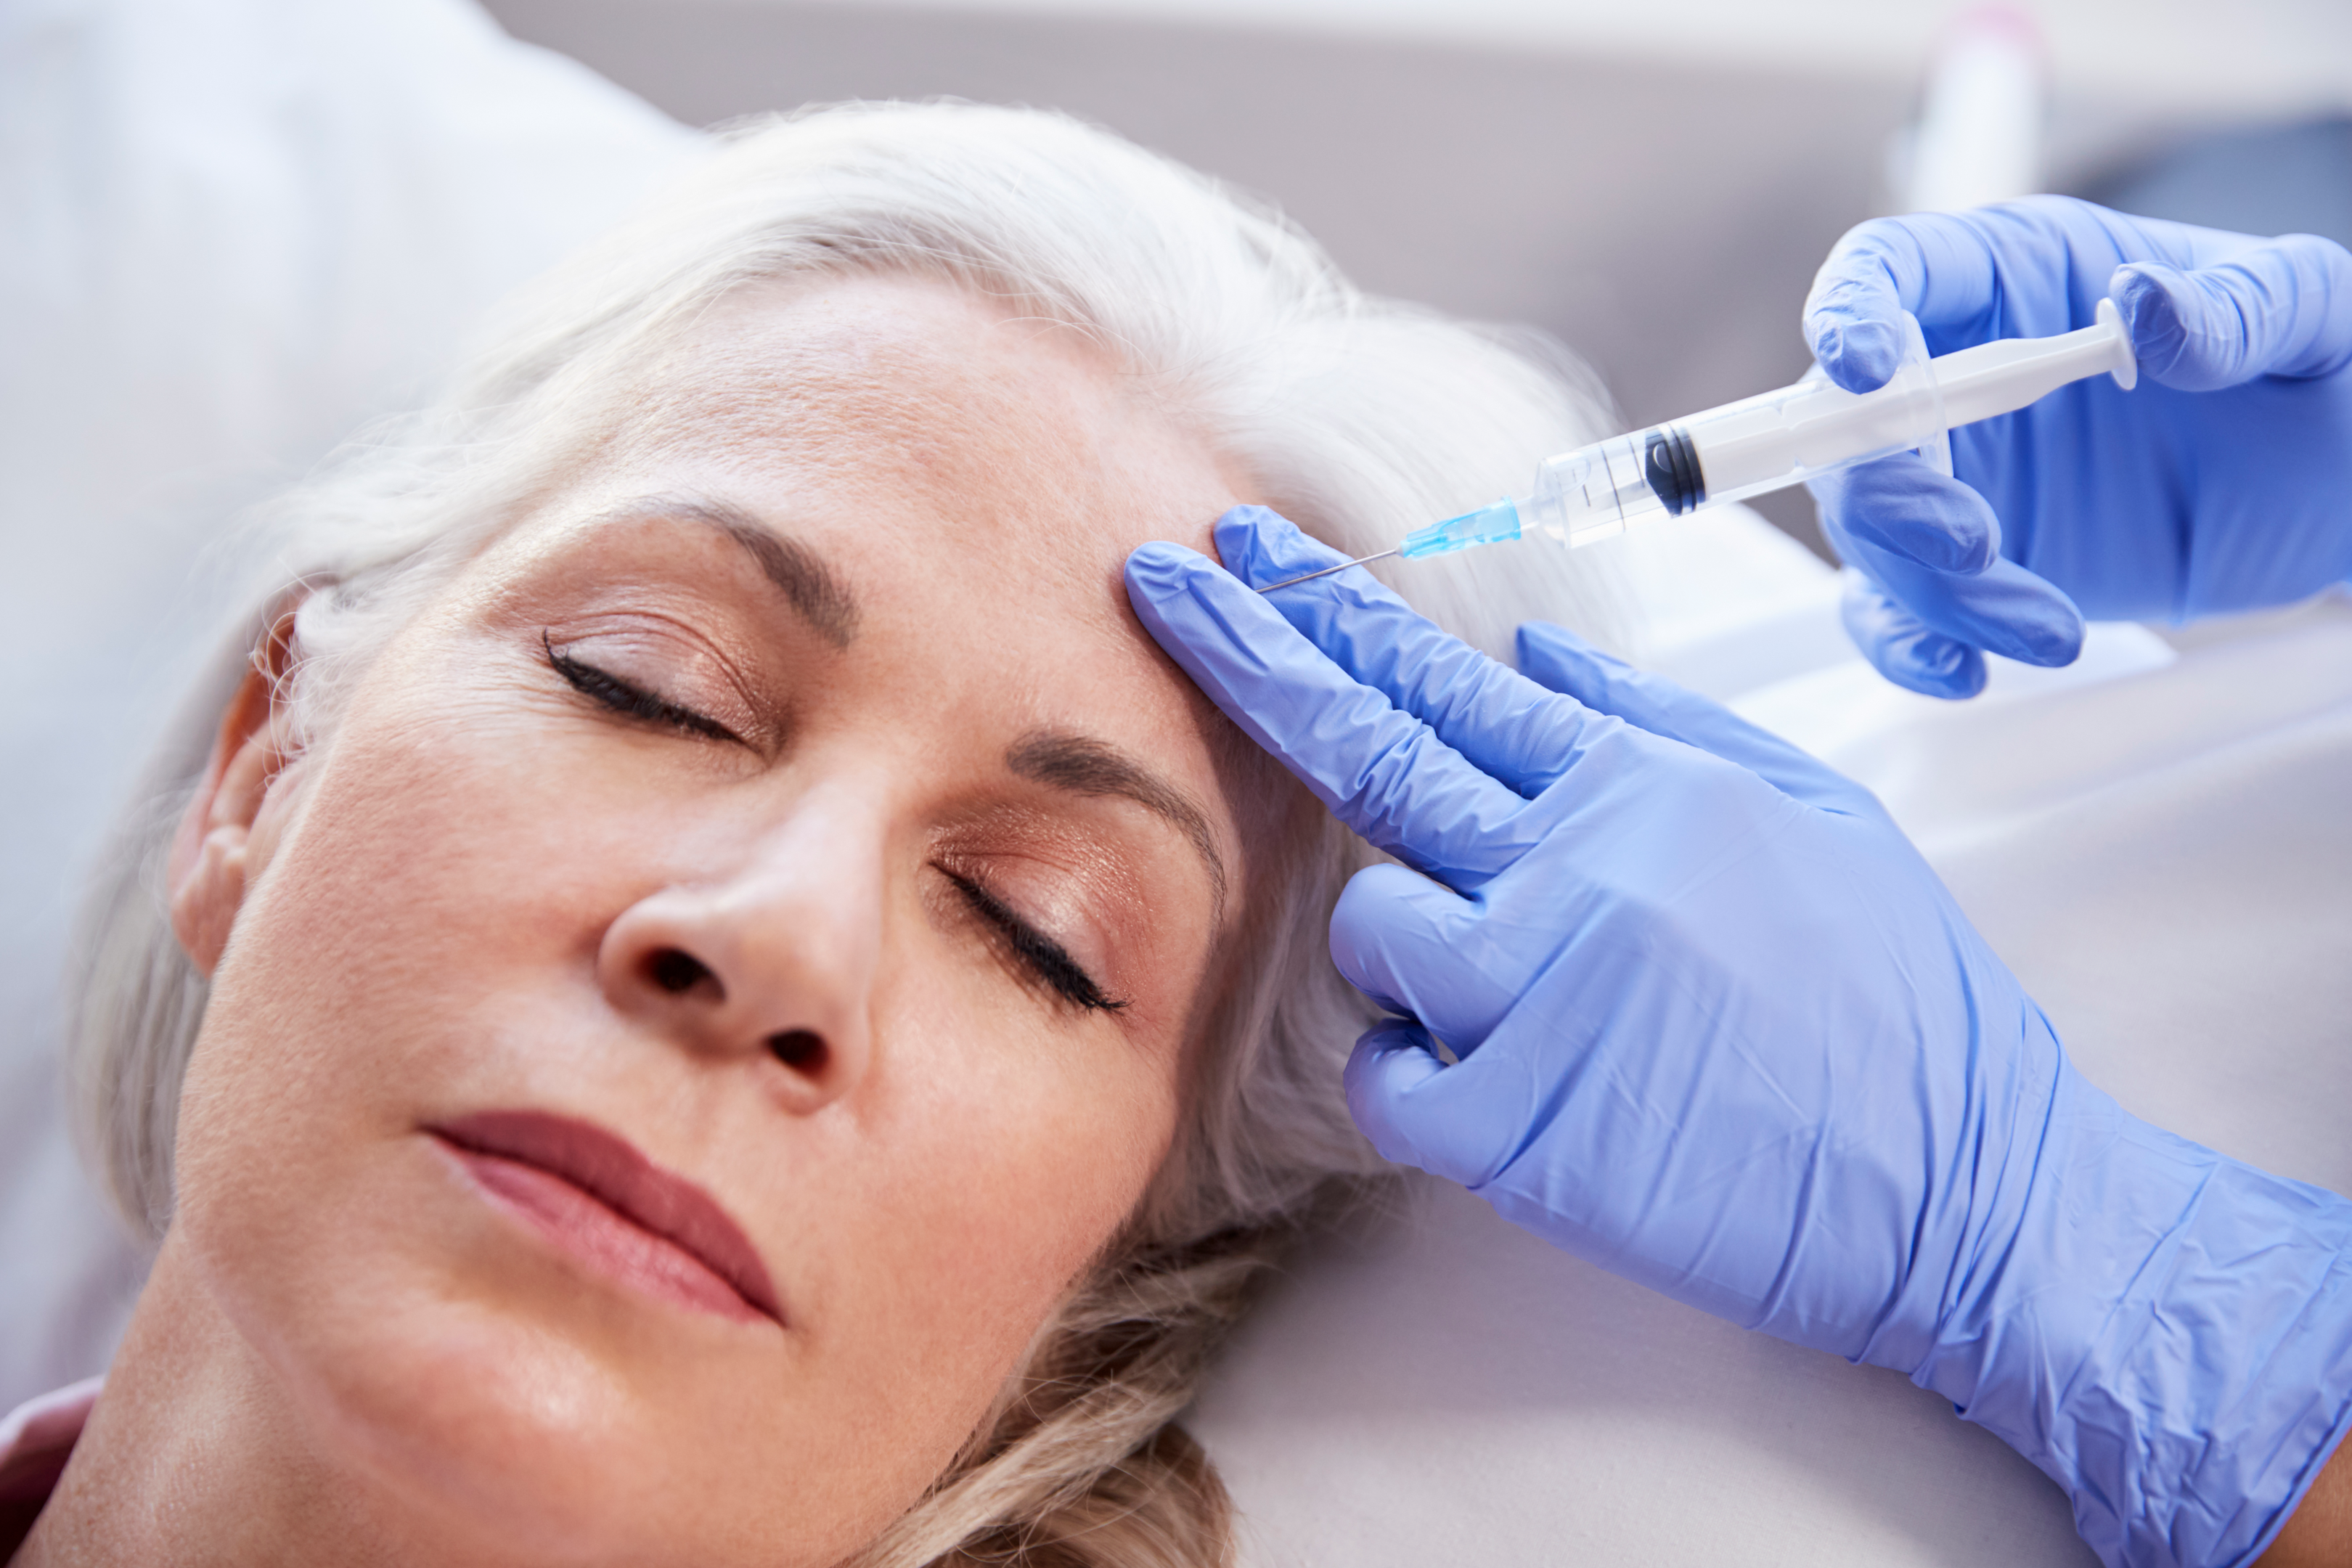 Most botox treatments are fast and virtually painless.